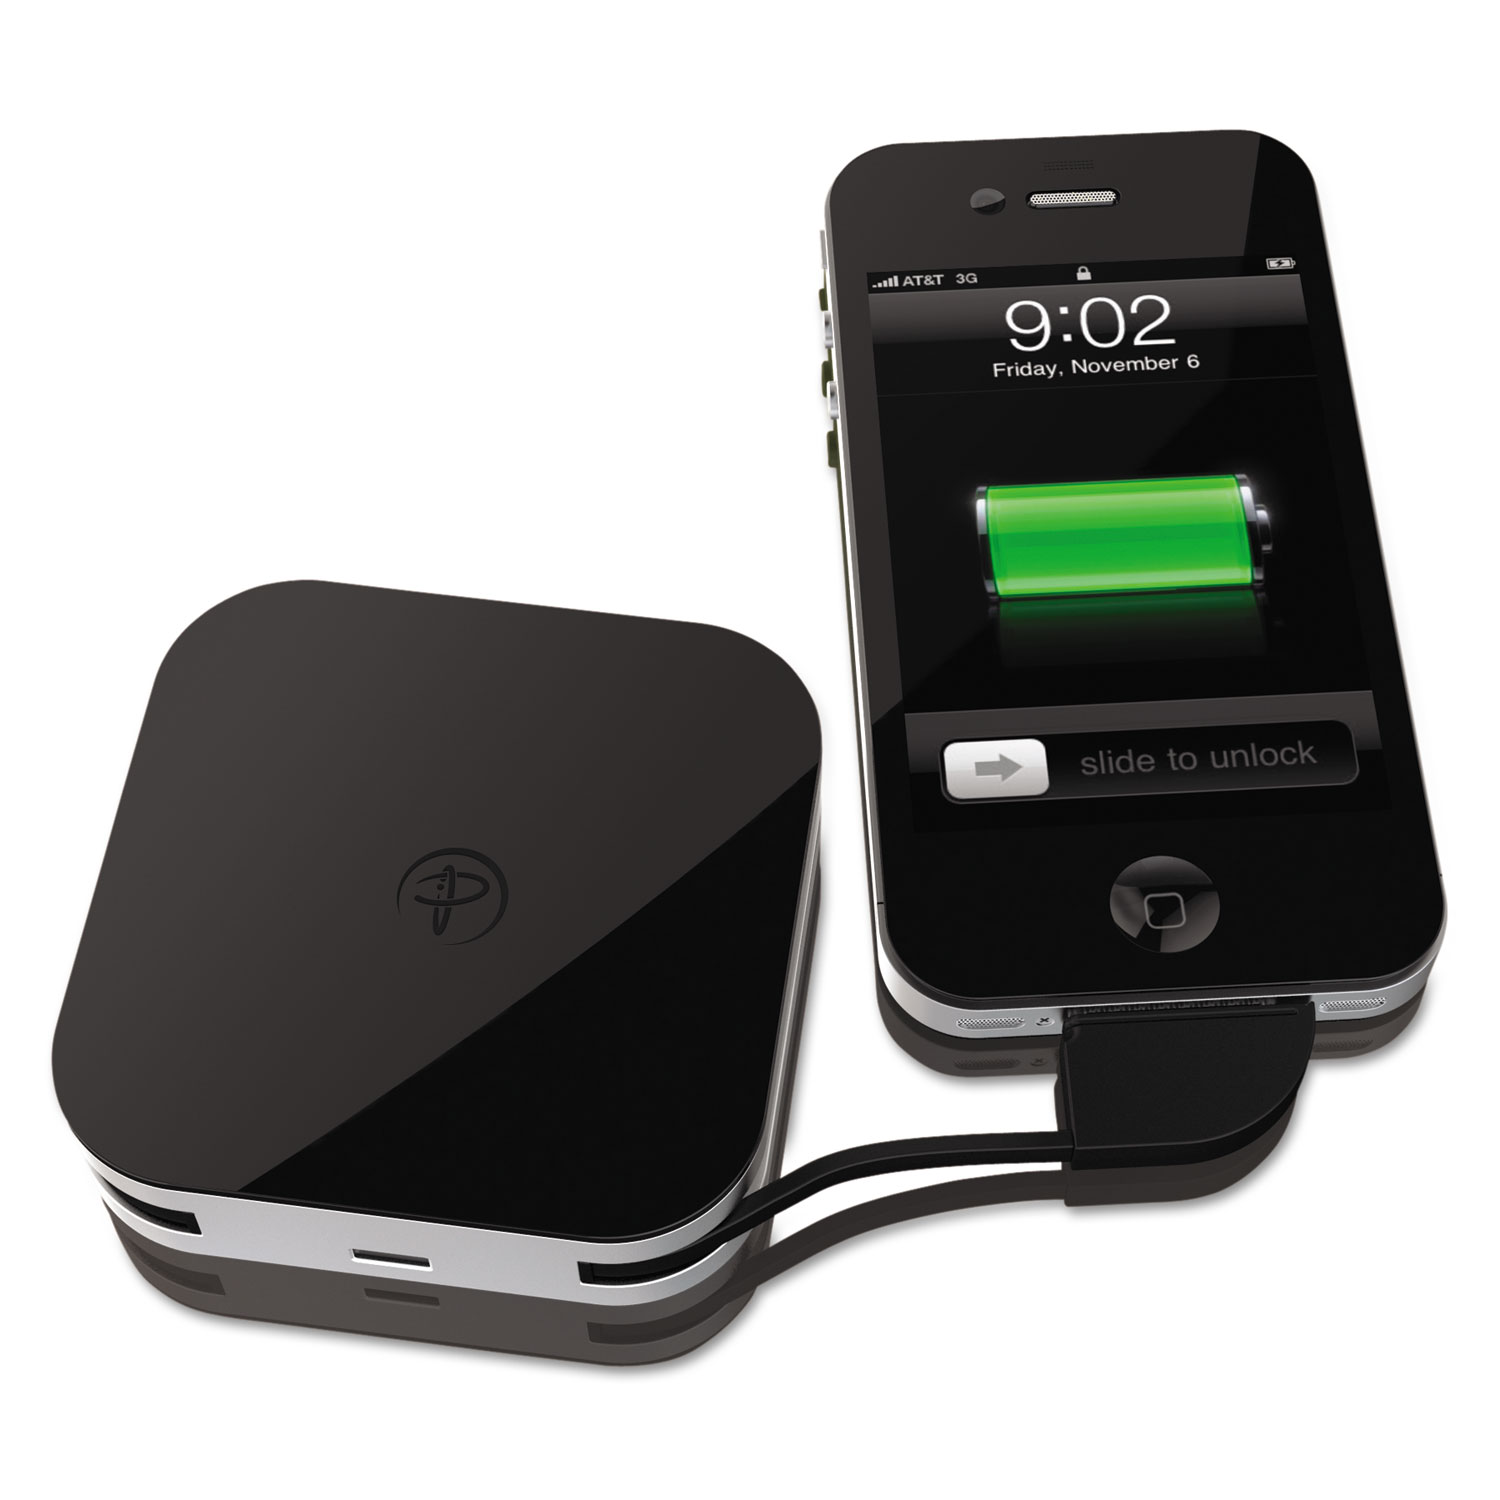 GoPower Universal Battery for iPhone 4/4S, 1850 mAh, Black